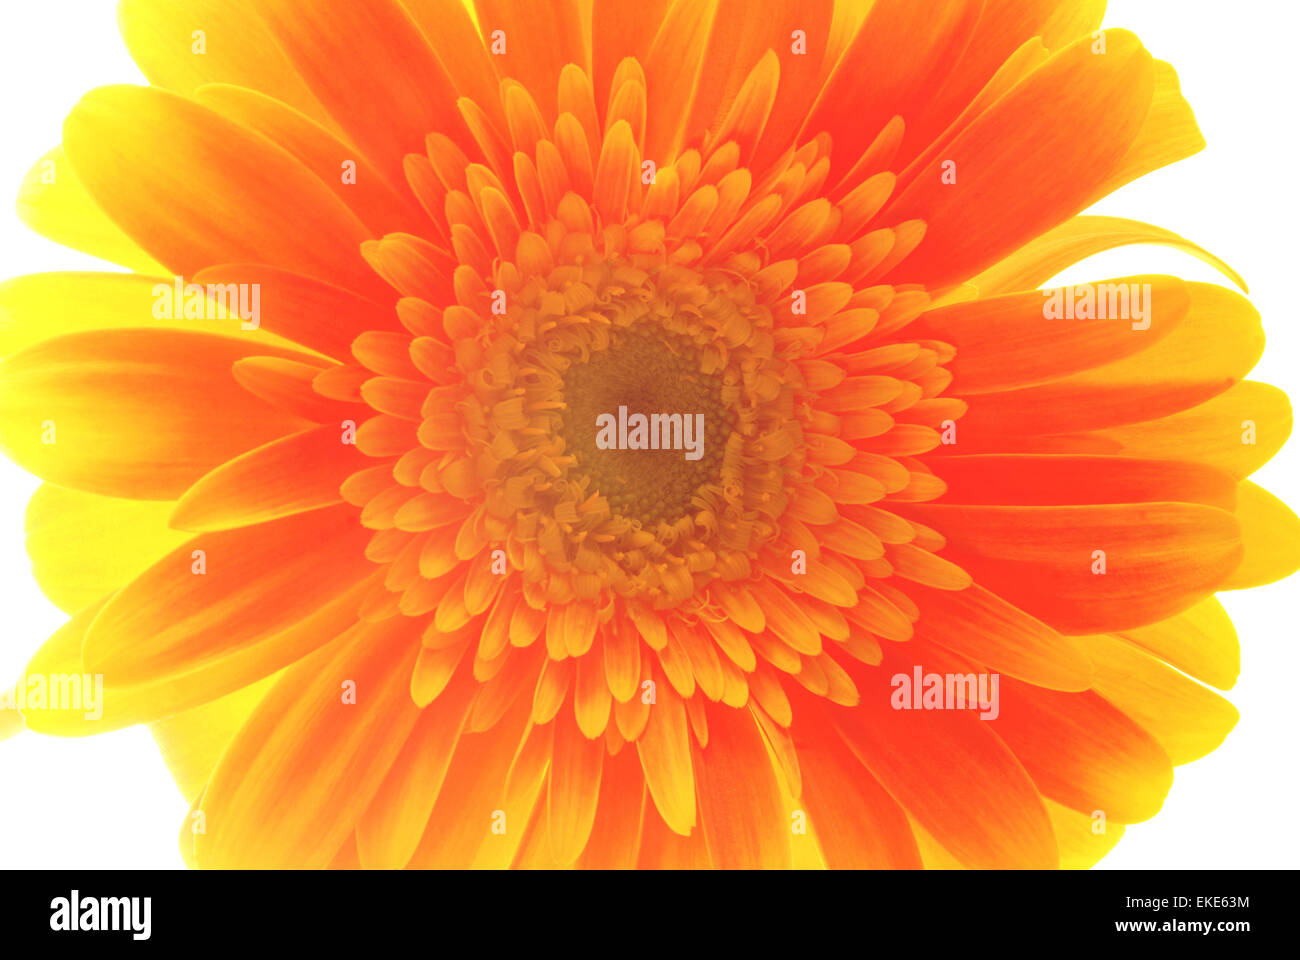 Retro orange daisy flower isolated close up. Vintage soft color hipster style. Stock Photo